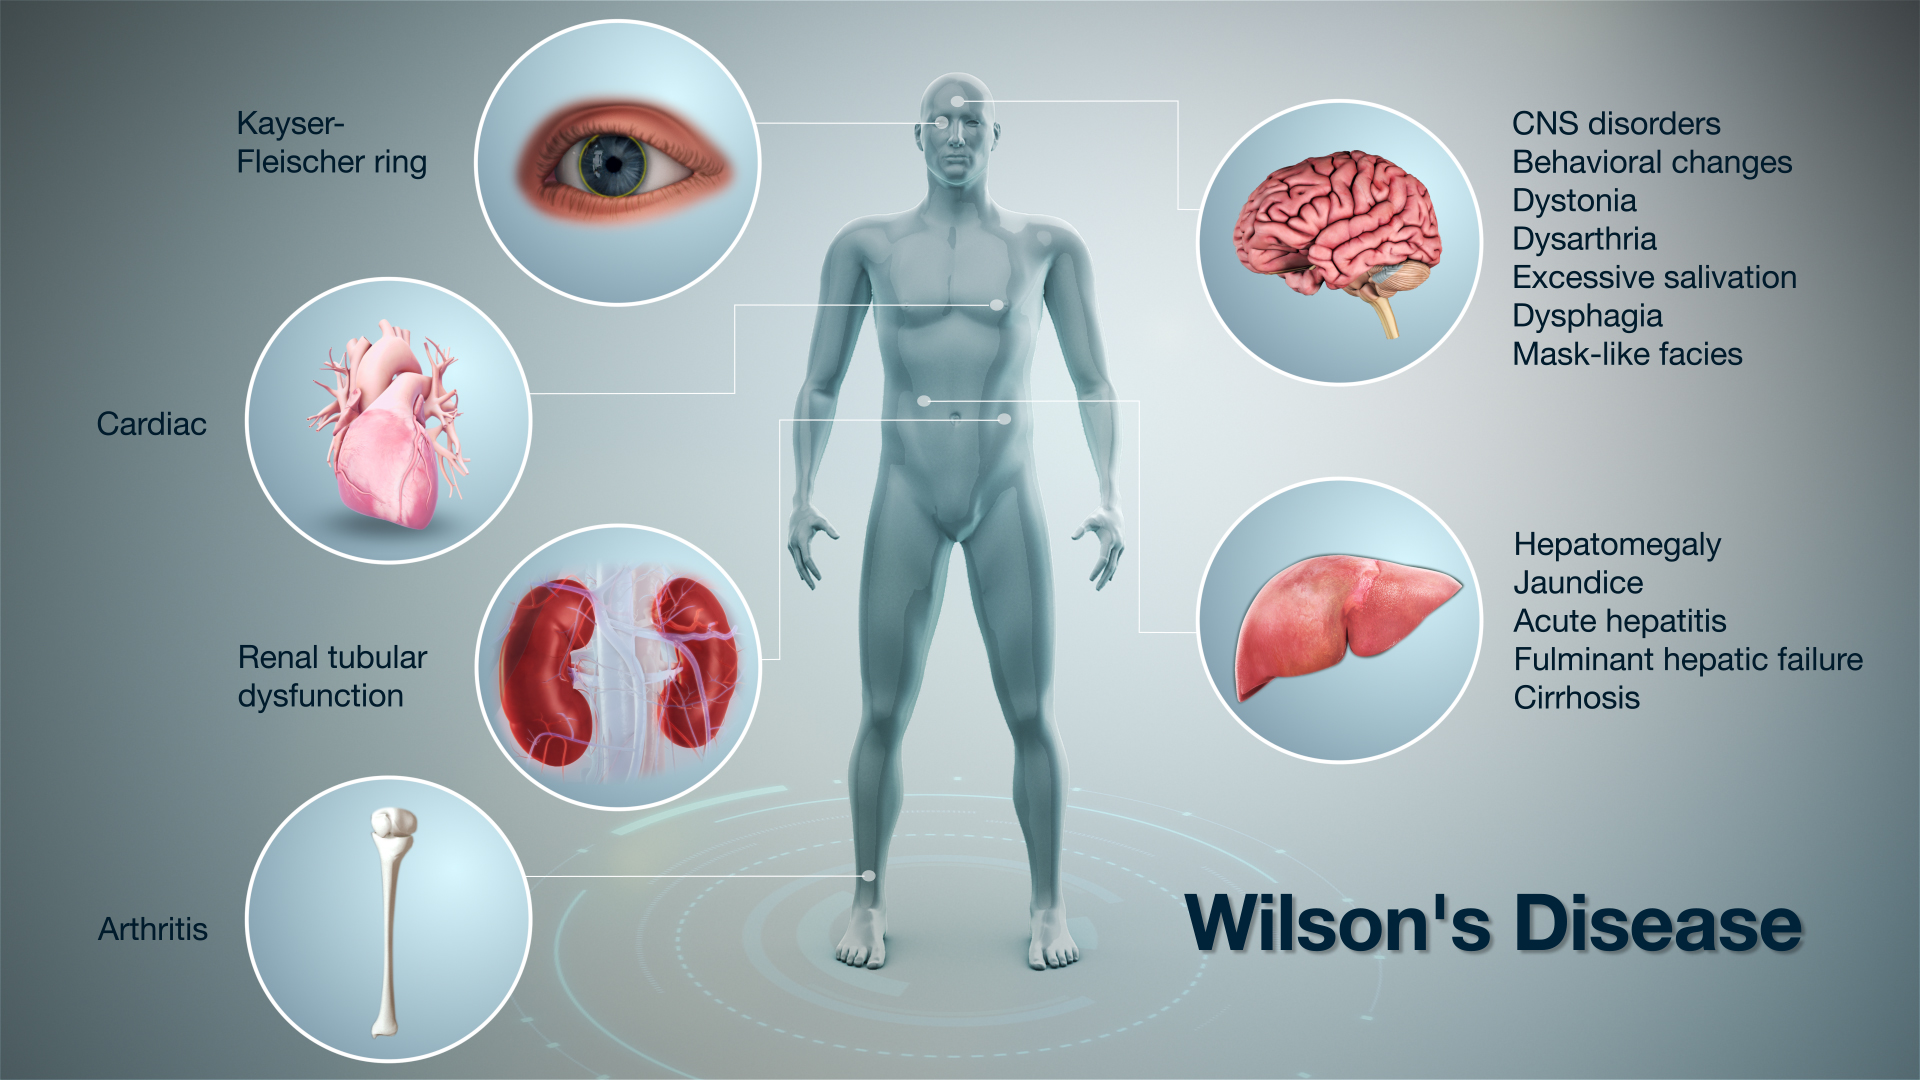 3D Medical Animation depicting Wilson's Disease